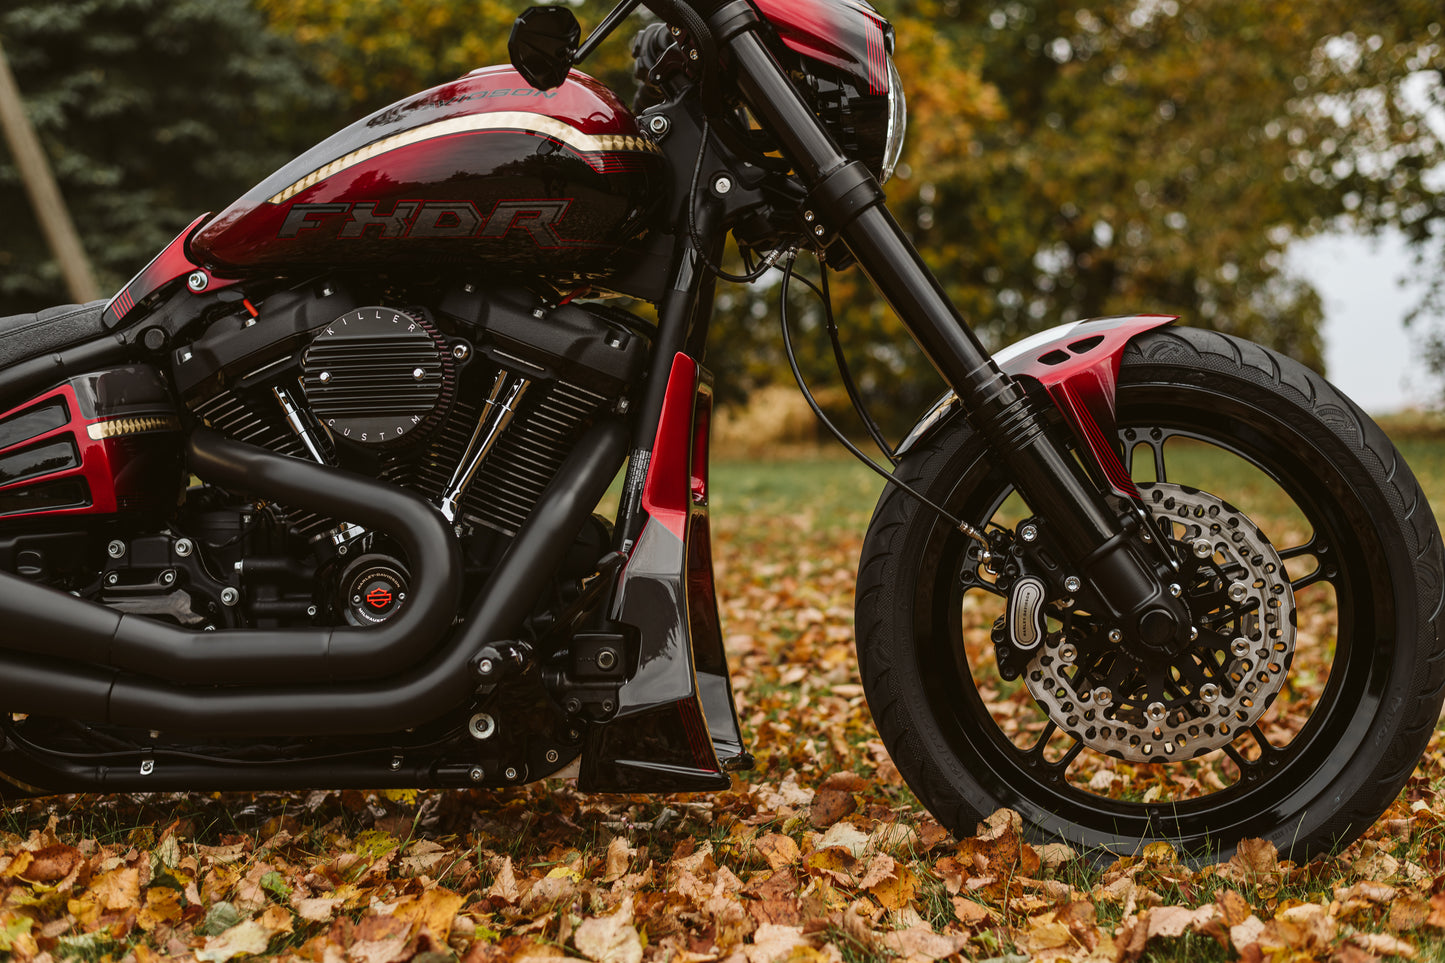 Harley Davidson motorcycle with Killer Custom "Avenger" front fender outside with some trees and fallen leaves in the background